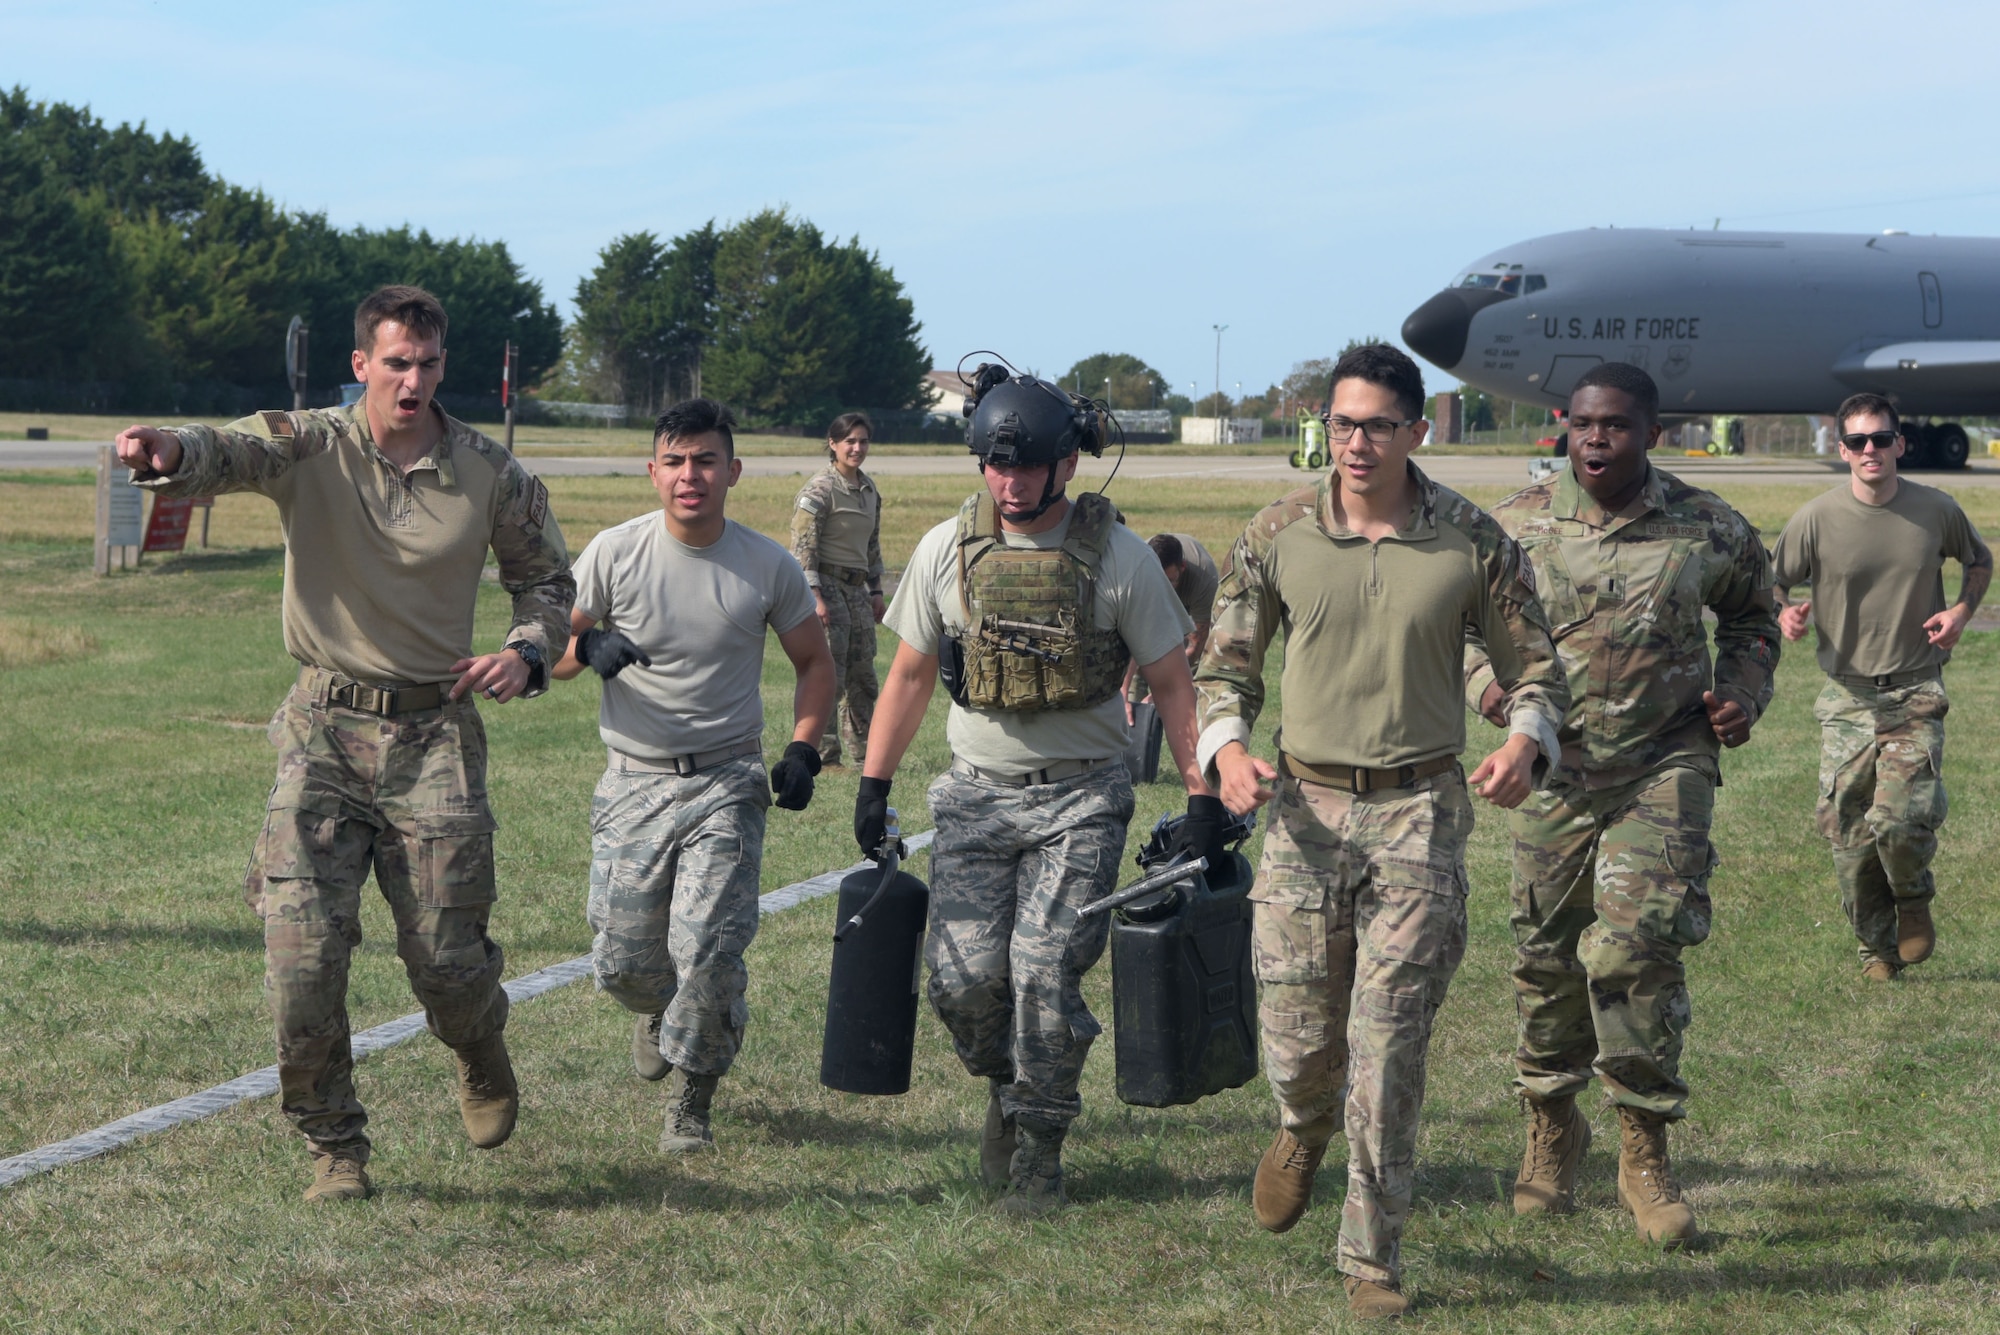 Airmen assigned to the 100th Logistics Readiness Squadron run together during a Forward Area Refueling Point team tryout at RAF Mildenhall, England, Sept. 13, 2019. During FARP training, members wear full body armor to simulate encounters they may face downrange while refueling. (U.S. Air Force photo by Senior Airman Benjamin Cooper)